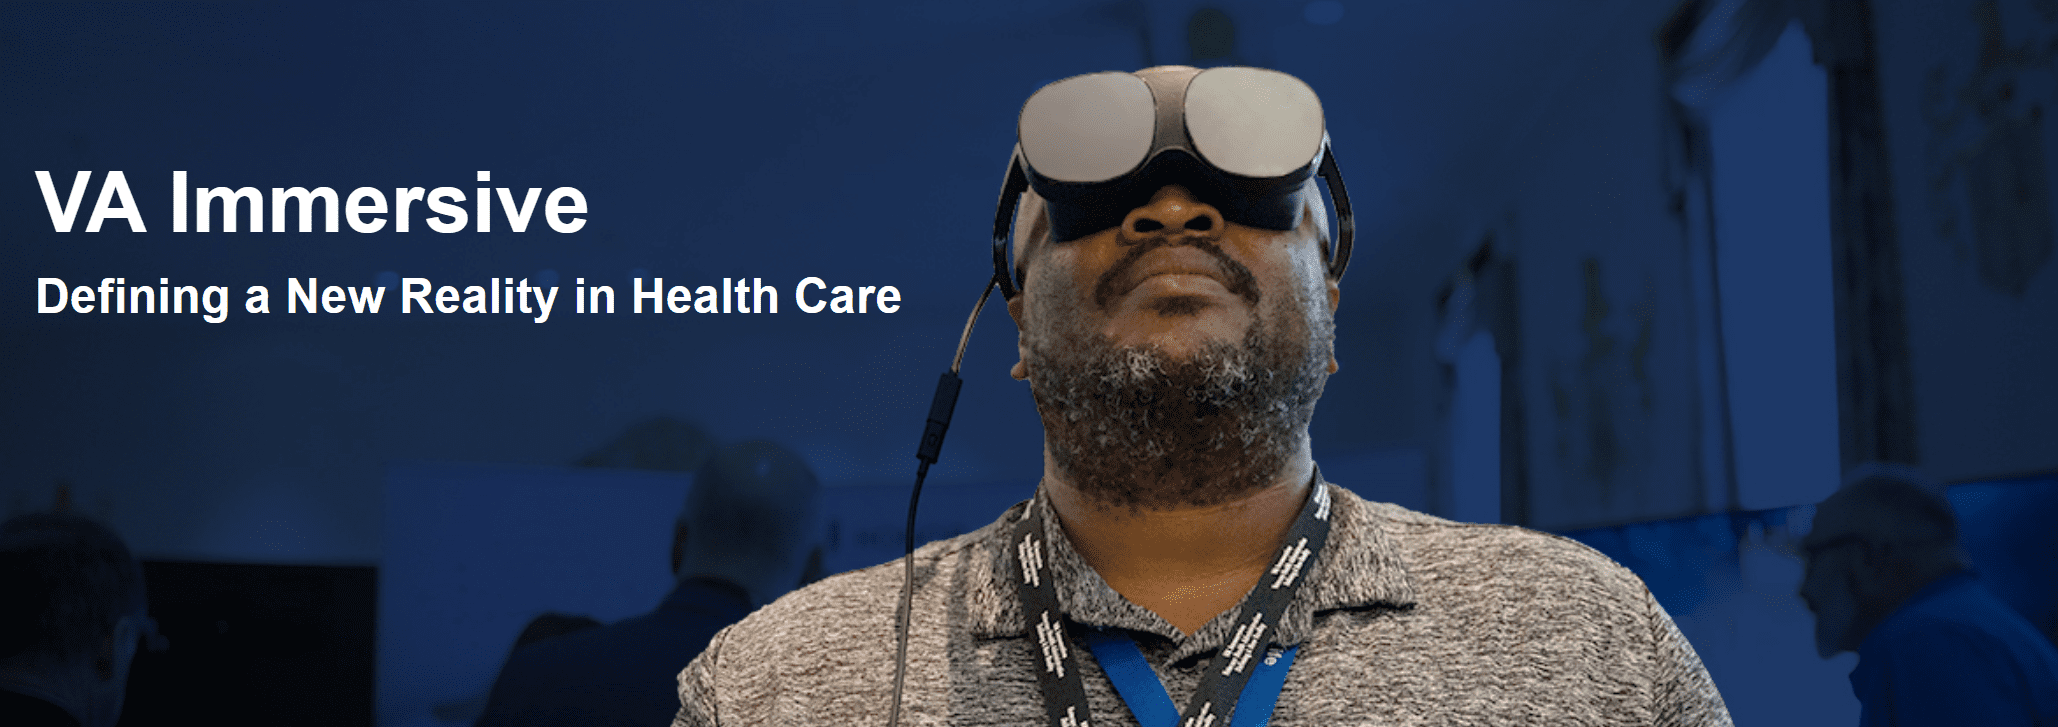 VA Expands Access to Virtual Reality Pain Therapy for Veterans